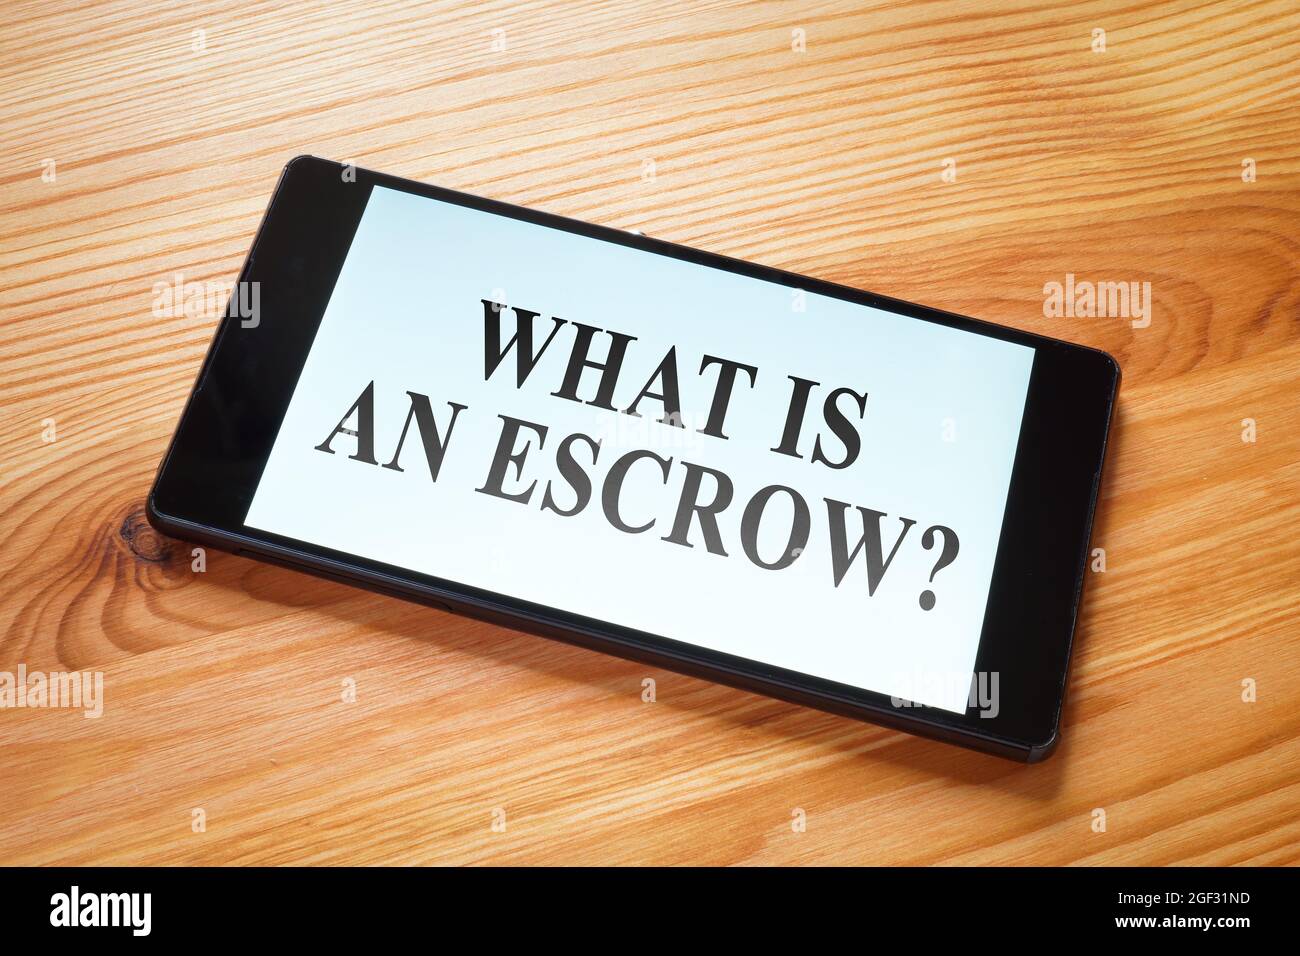 What is an escrow question on the smartphone screen. Stock Photo